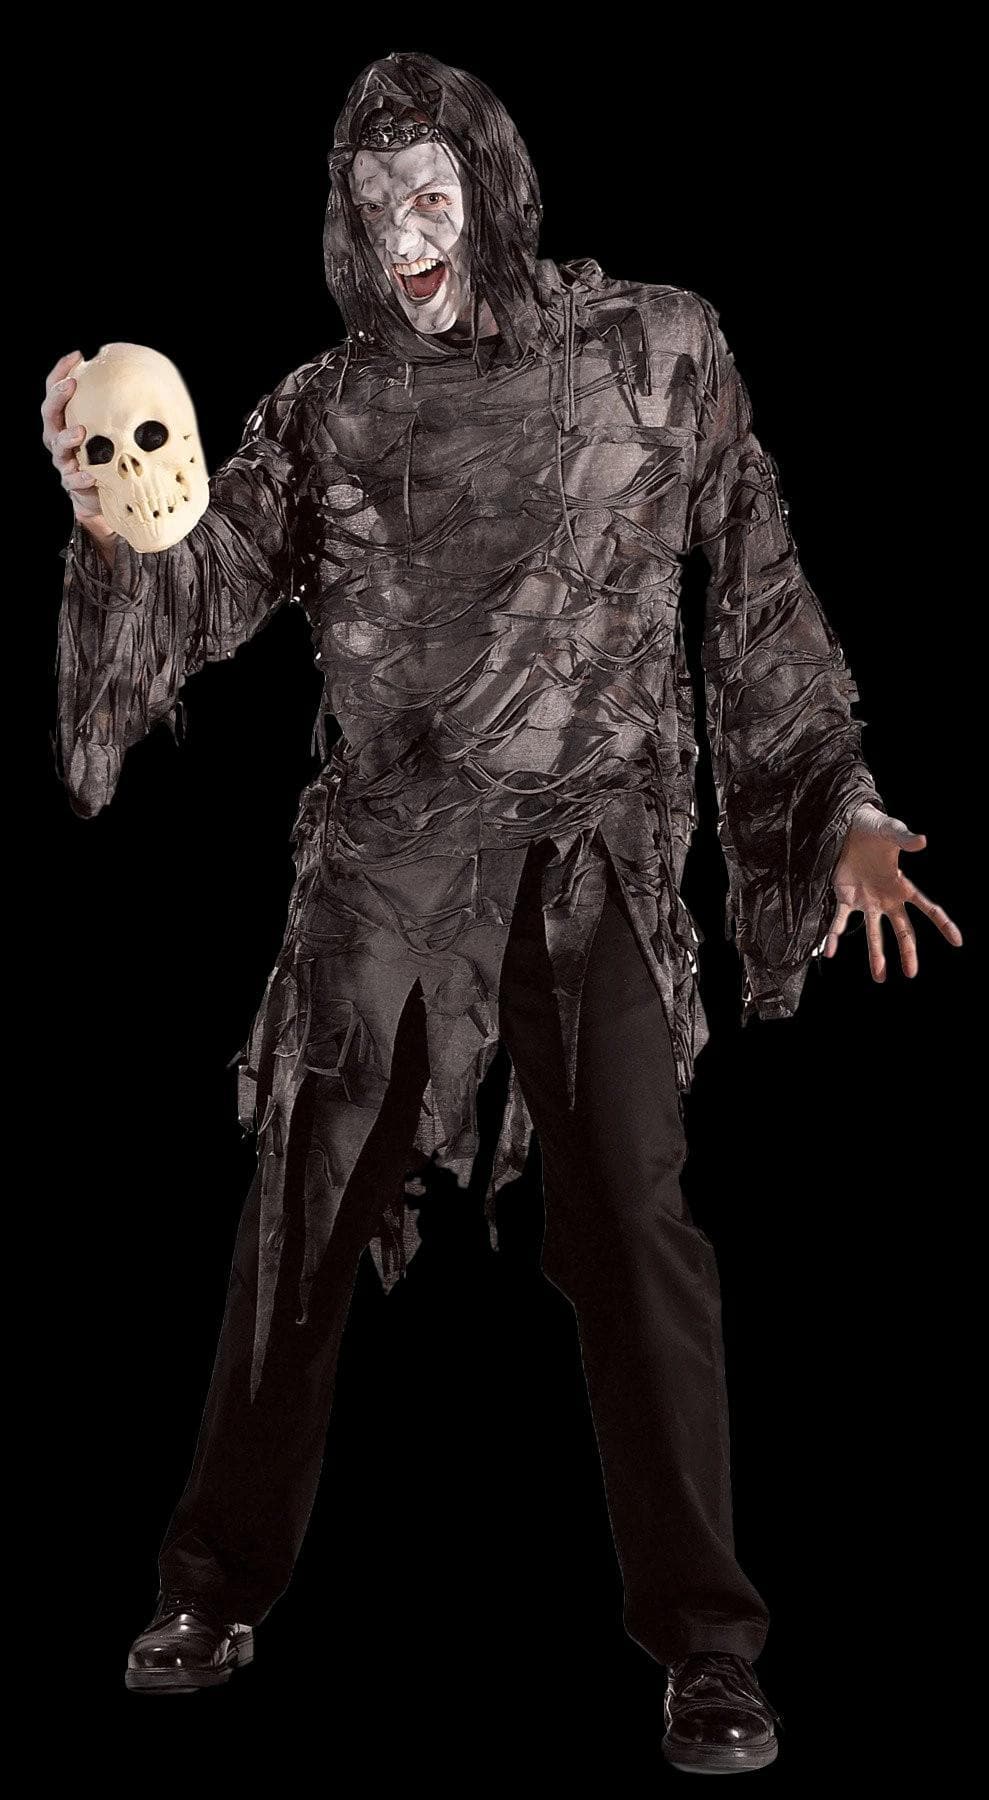 "Lord Gruesome" Value Halloween Costume